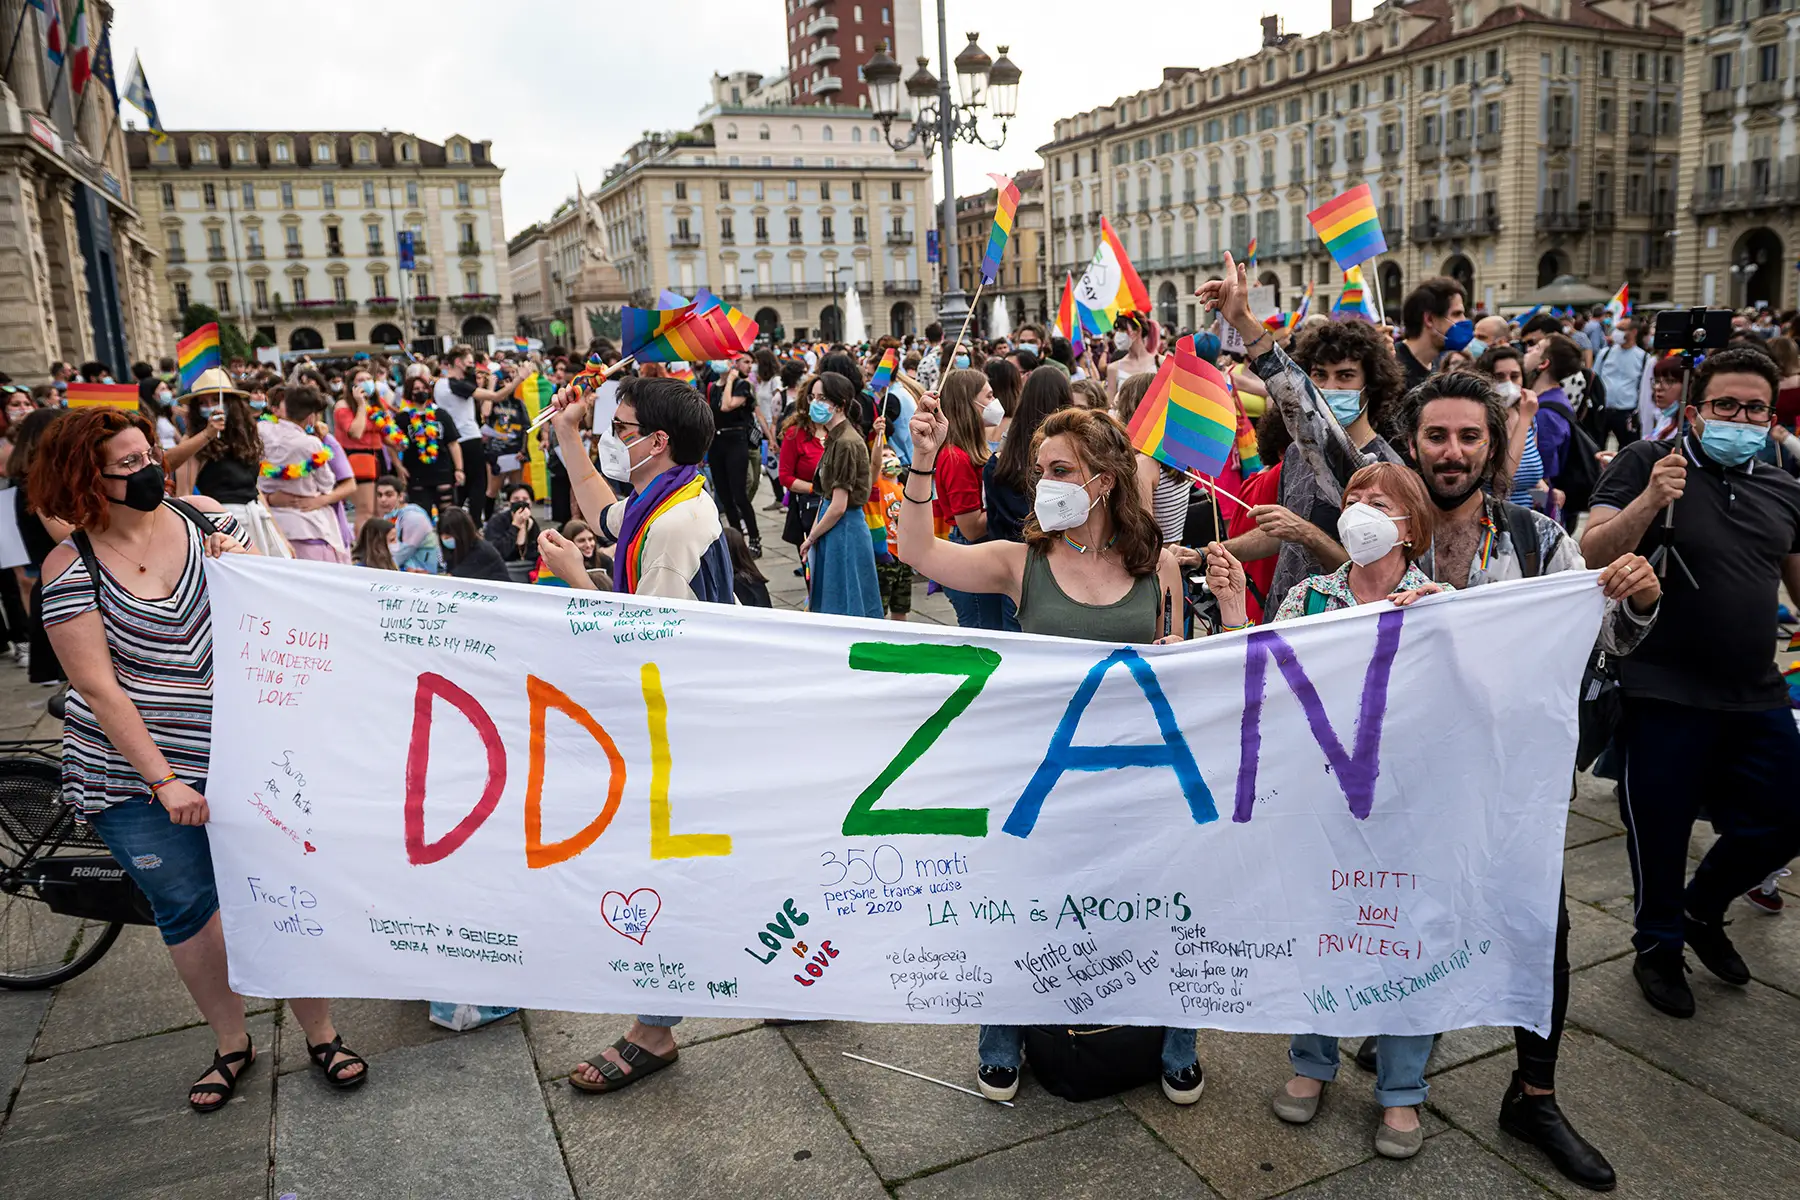 Protesters waving rainbow flags and holding a banner with 'DDL ZAN' written on it